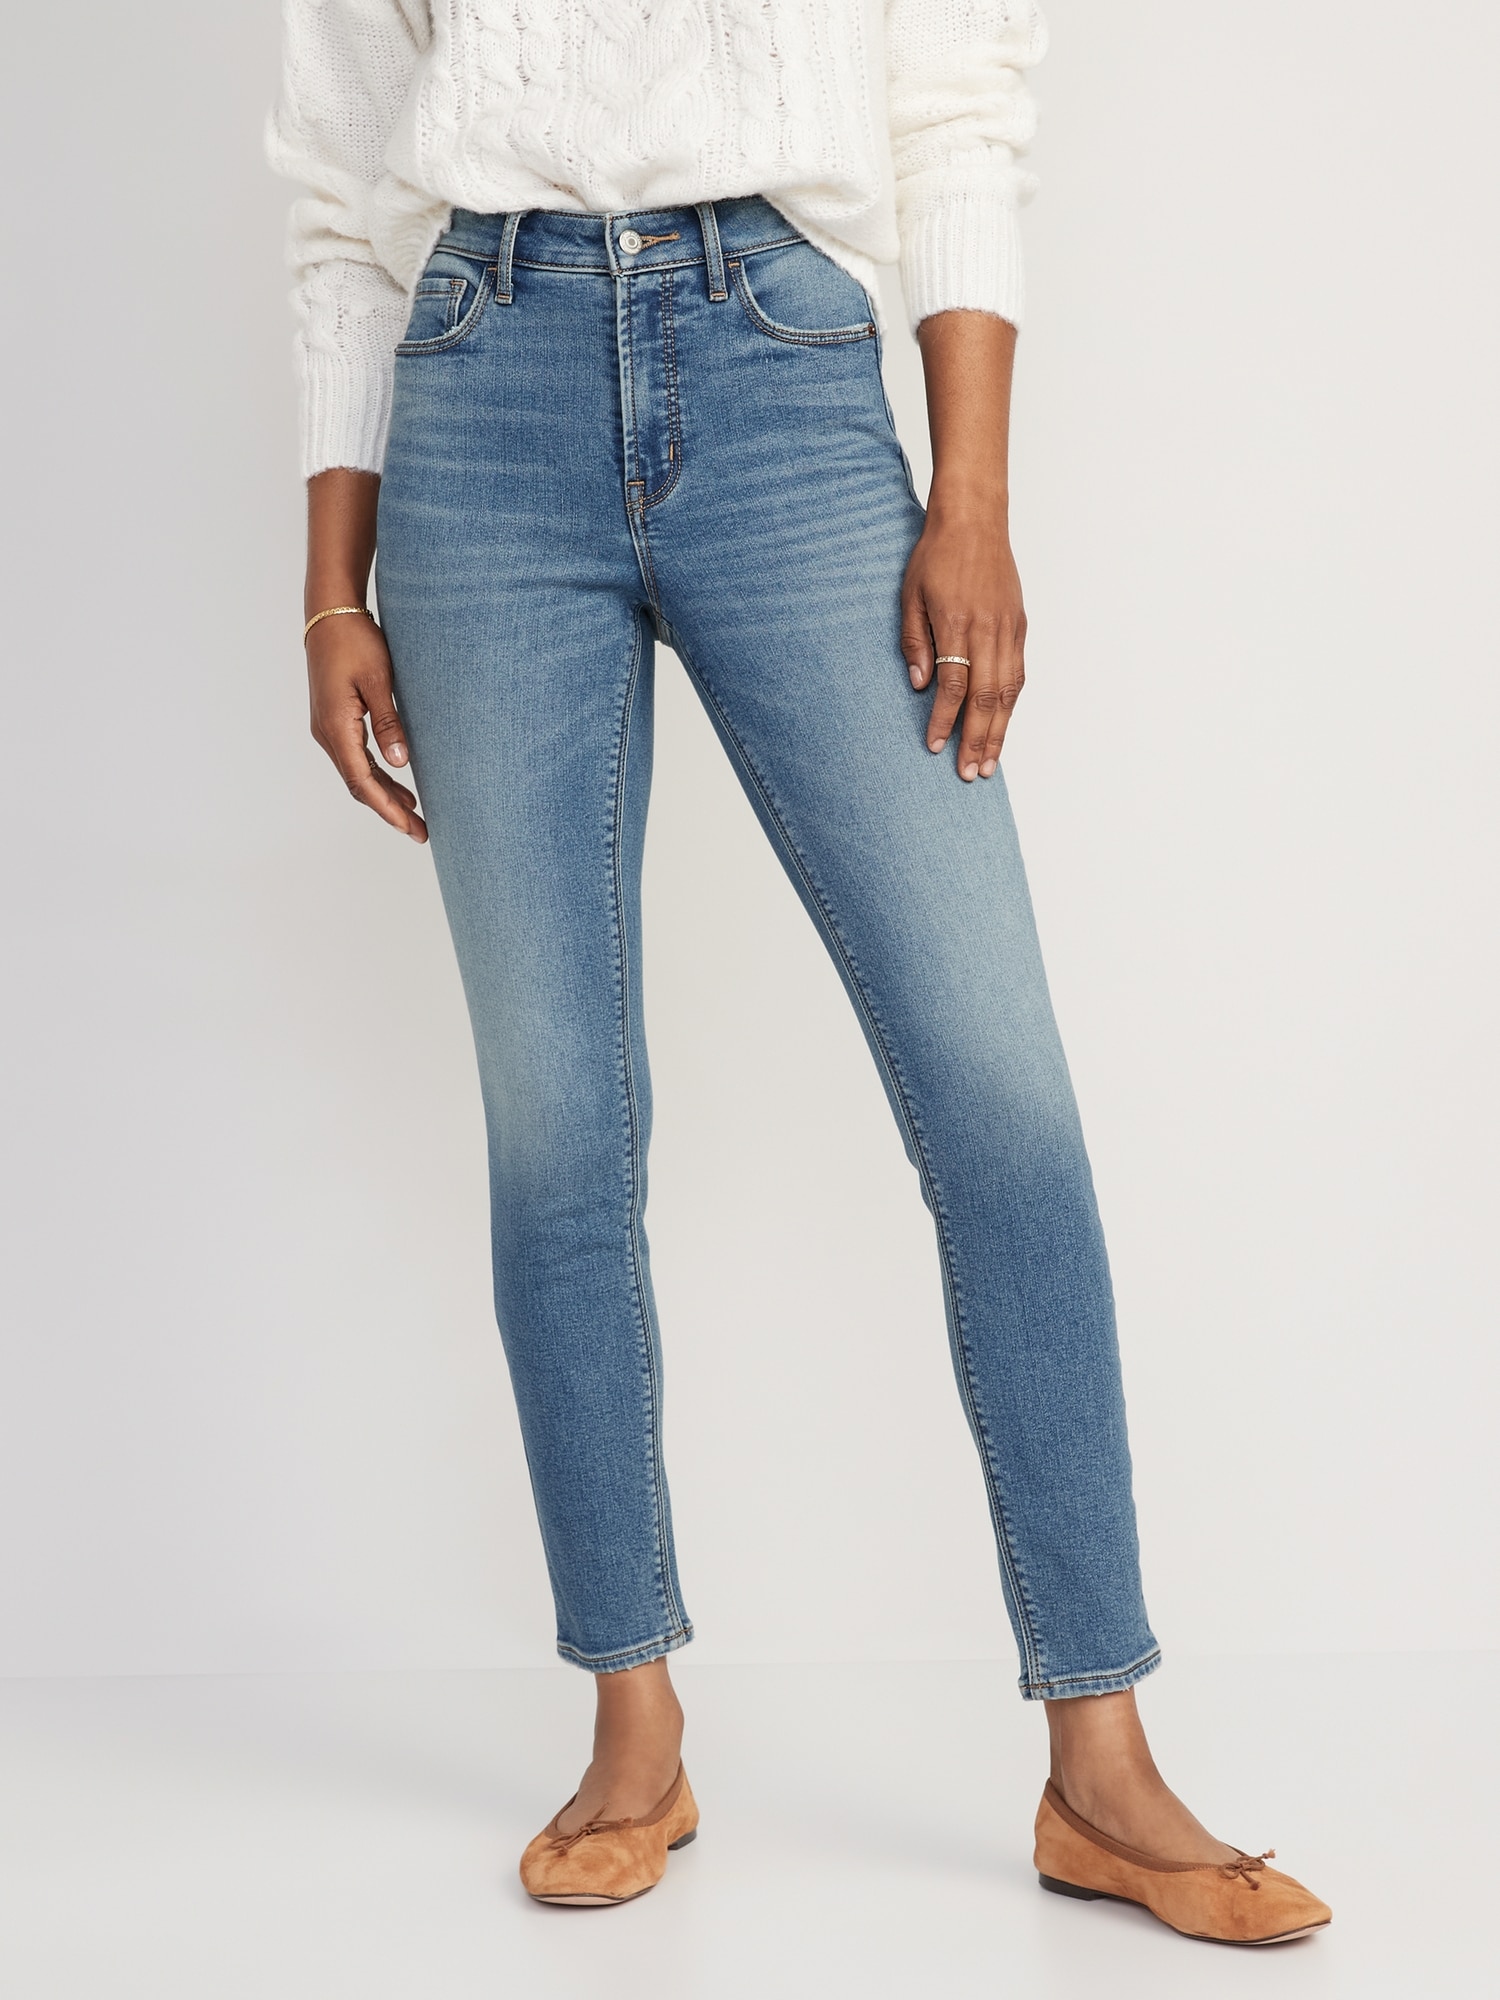 High-Waisted Rockstar Super-Skinny Built-In Warm Jeans for Women